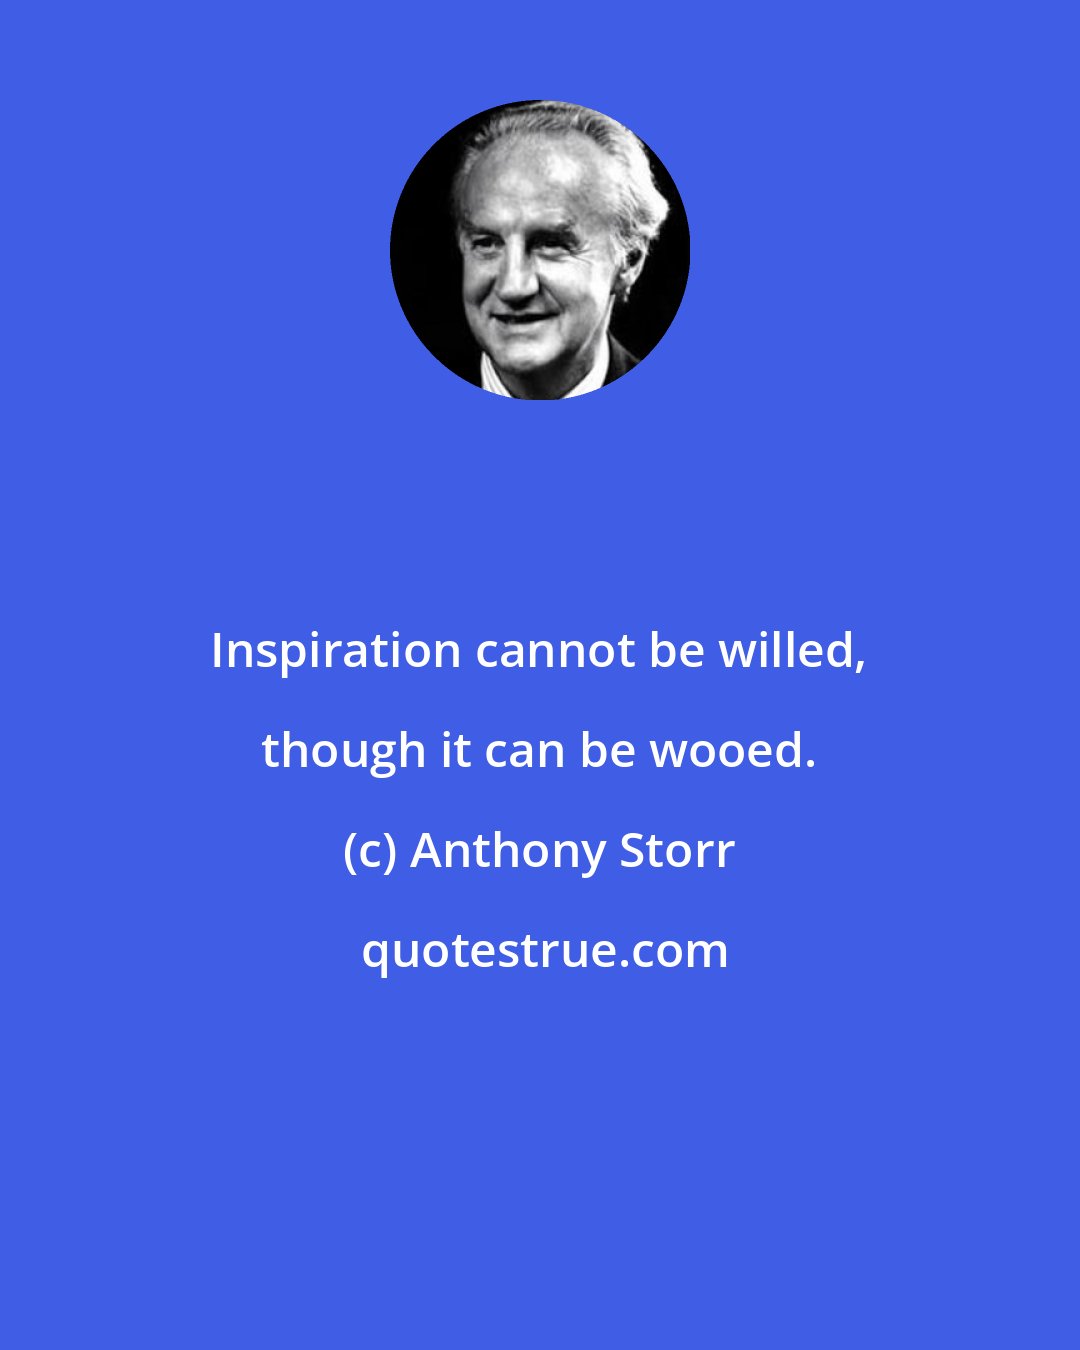 Anthony Storr: Inspiration cannot be willed, though it can be wooed.